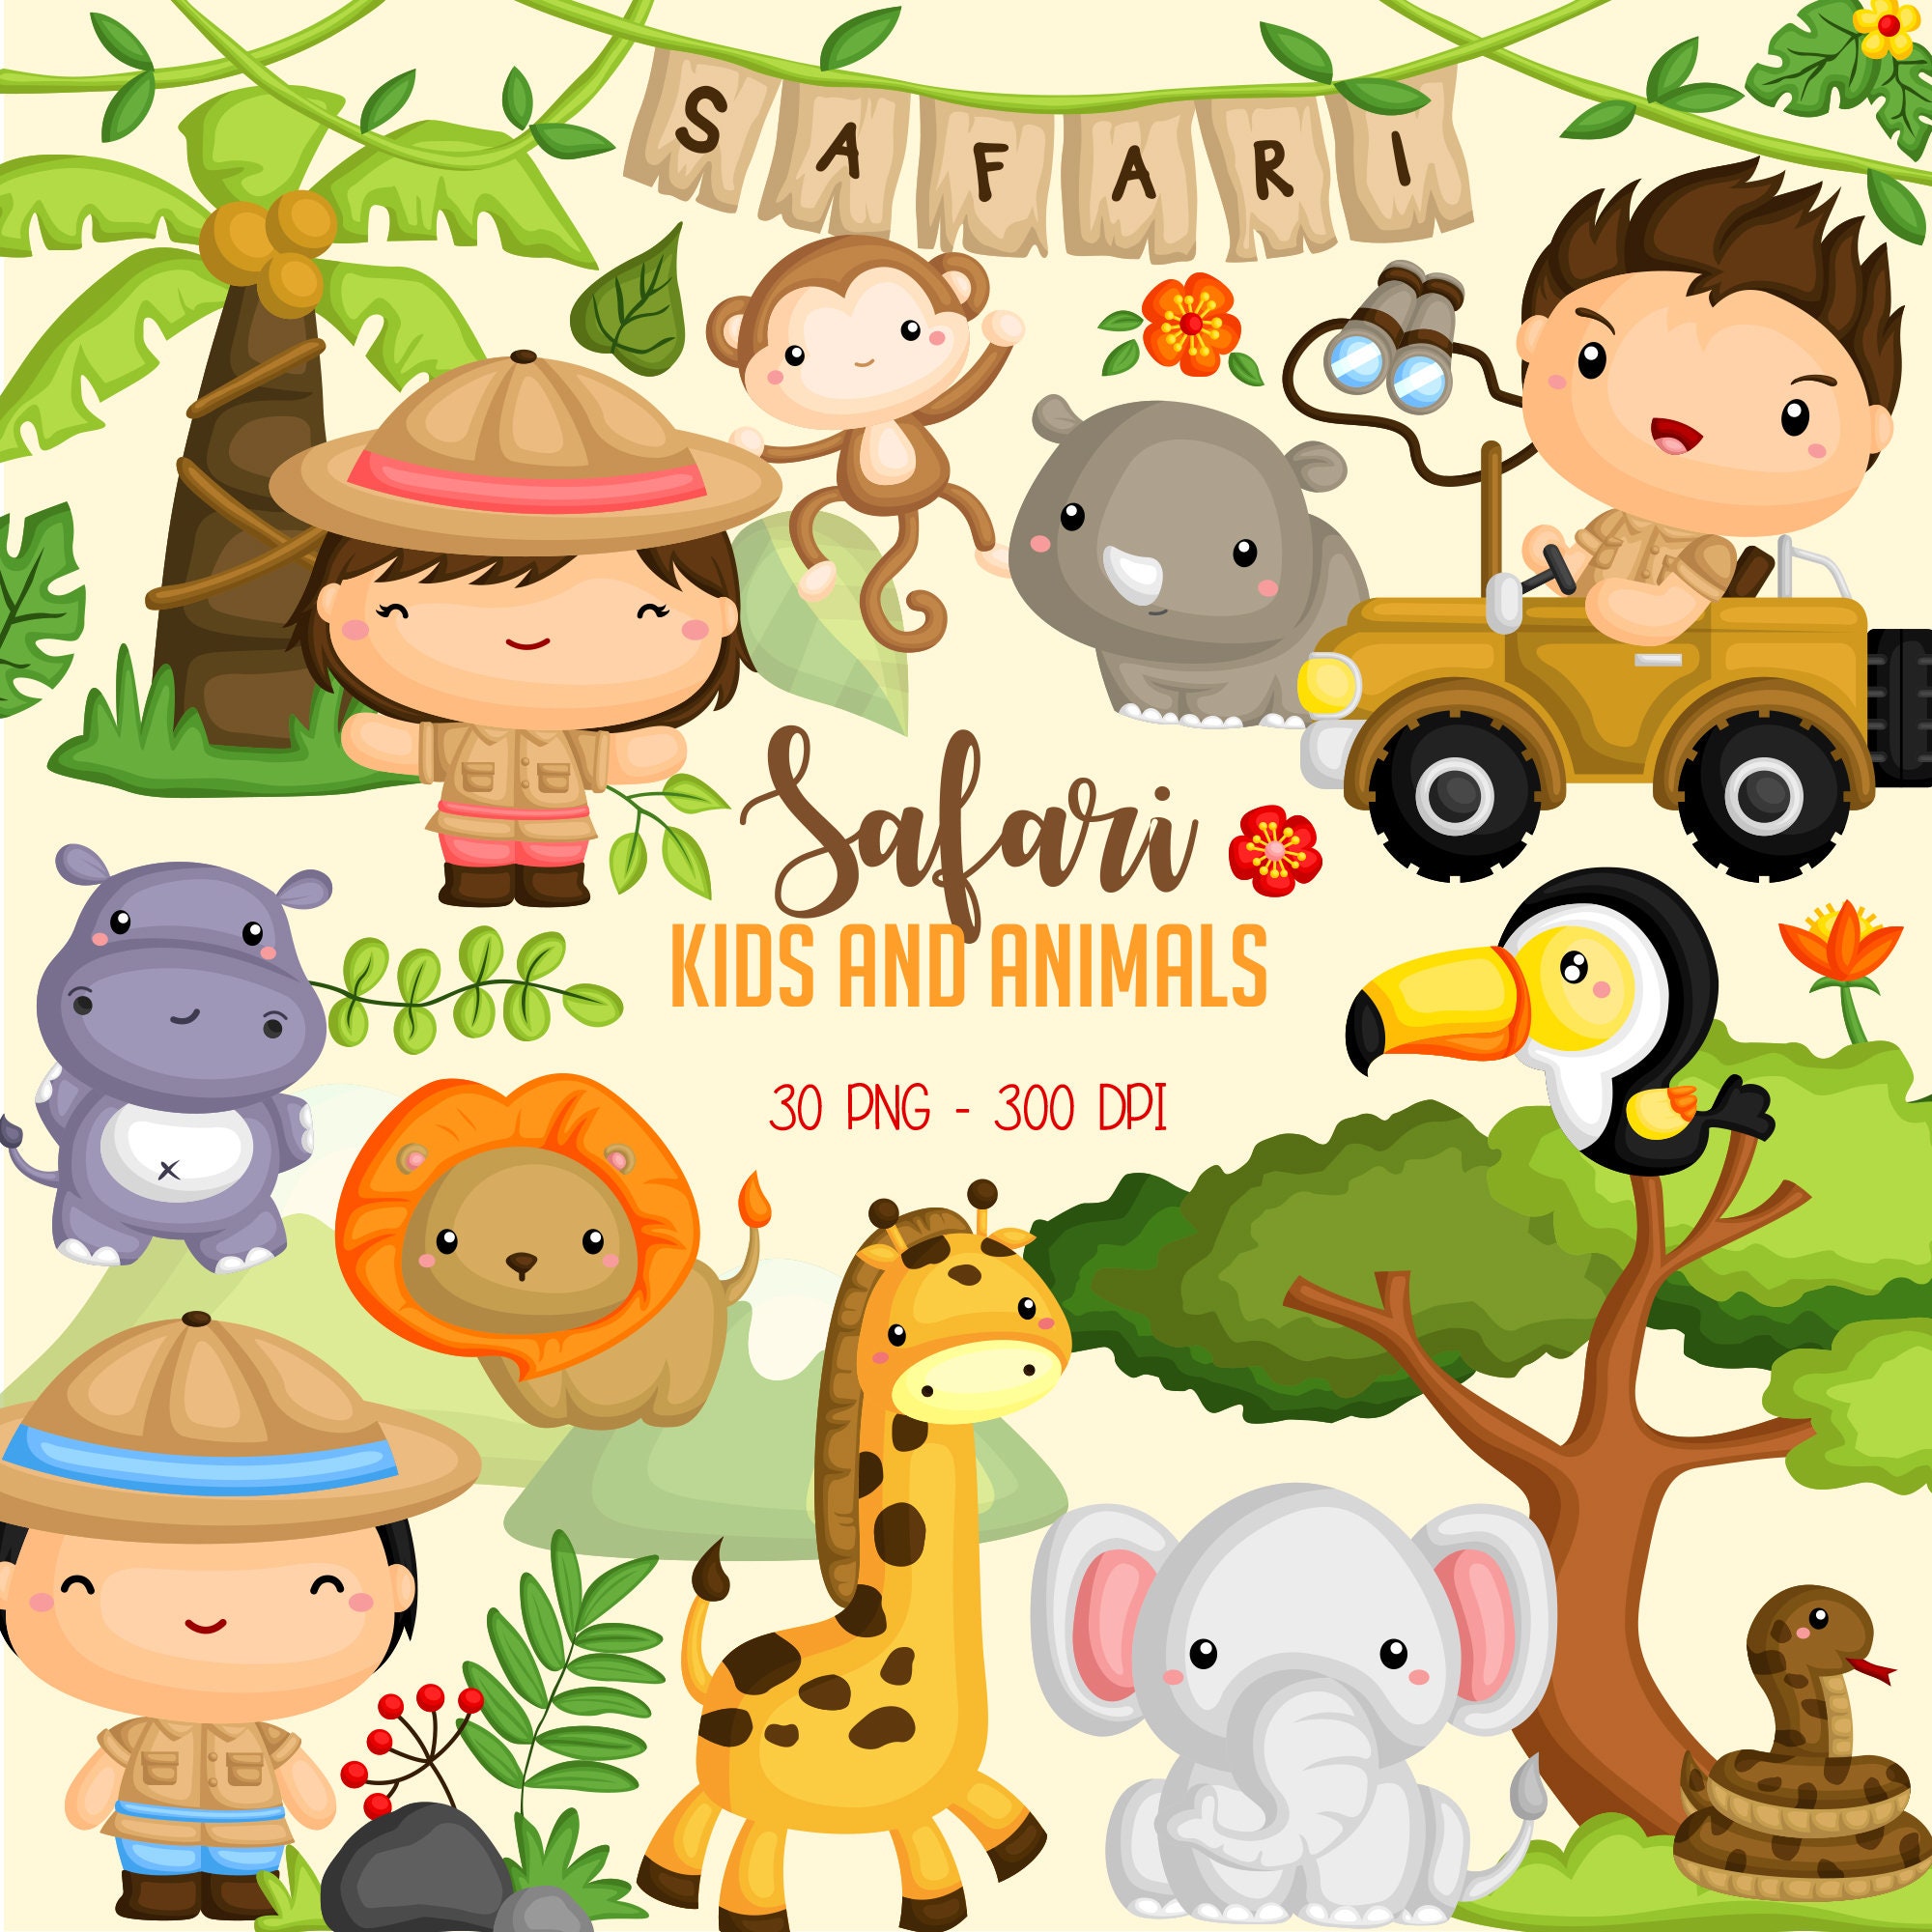 Download Safari Kids and Animal Clipart - Jungle Animal Clip Art - Cute Animal - Free SVG on Request